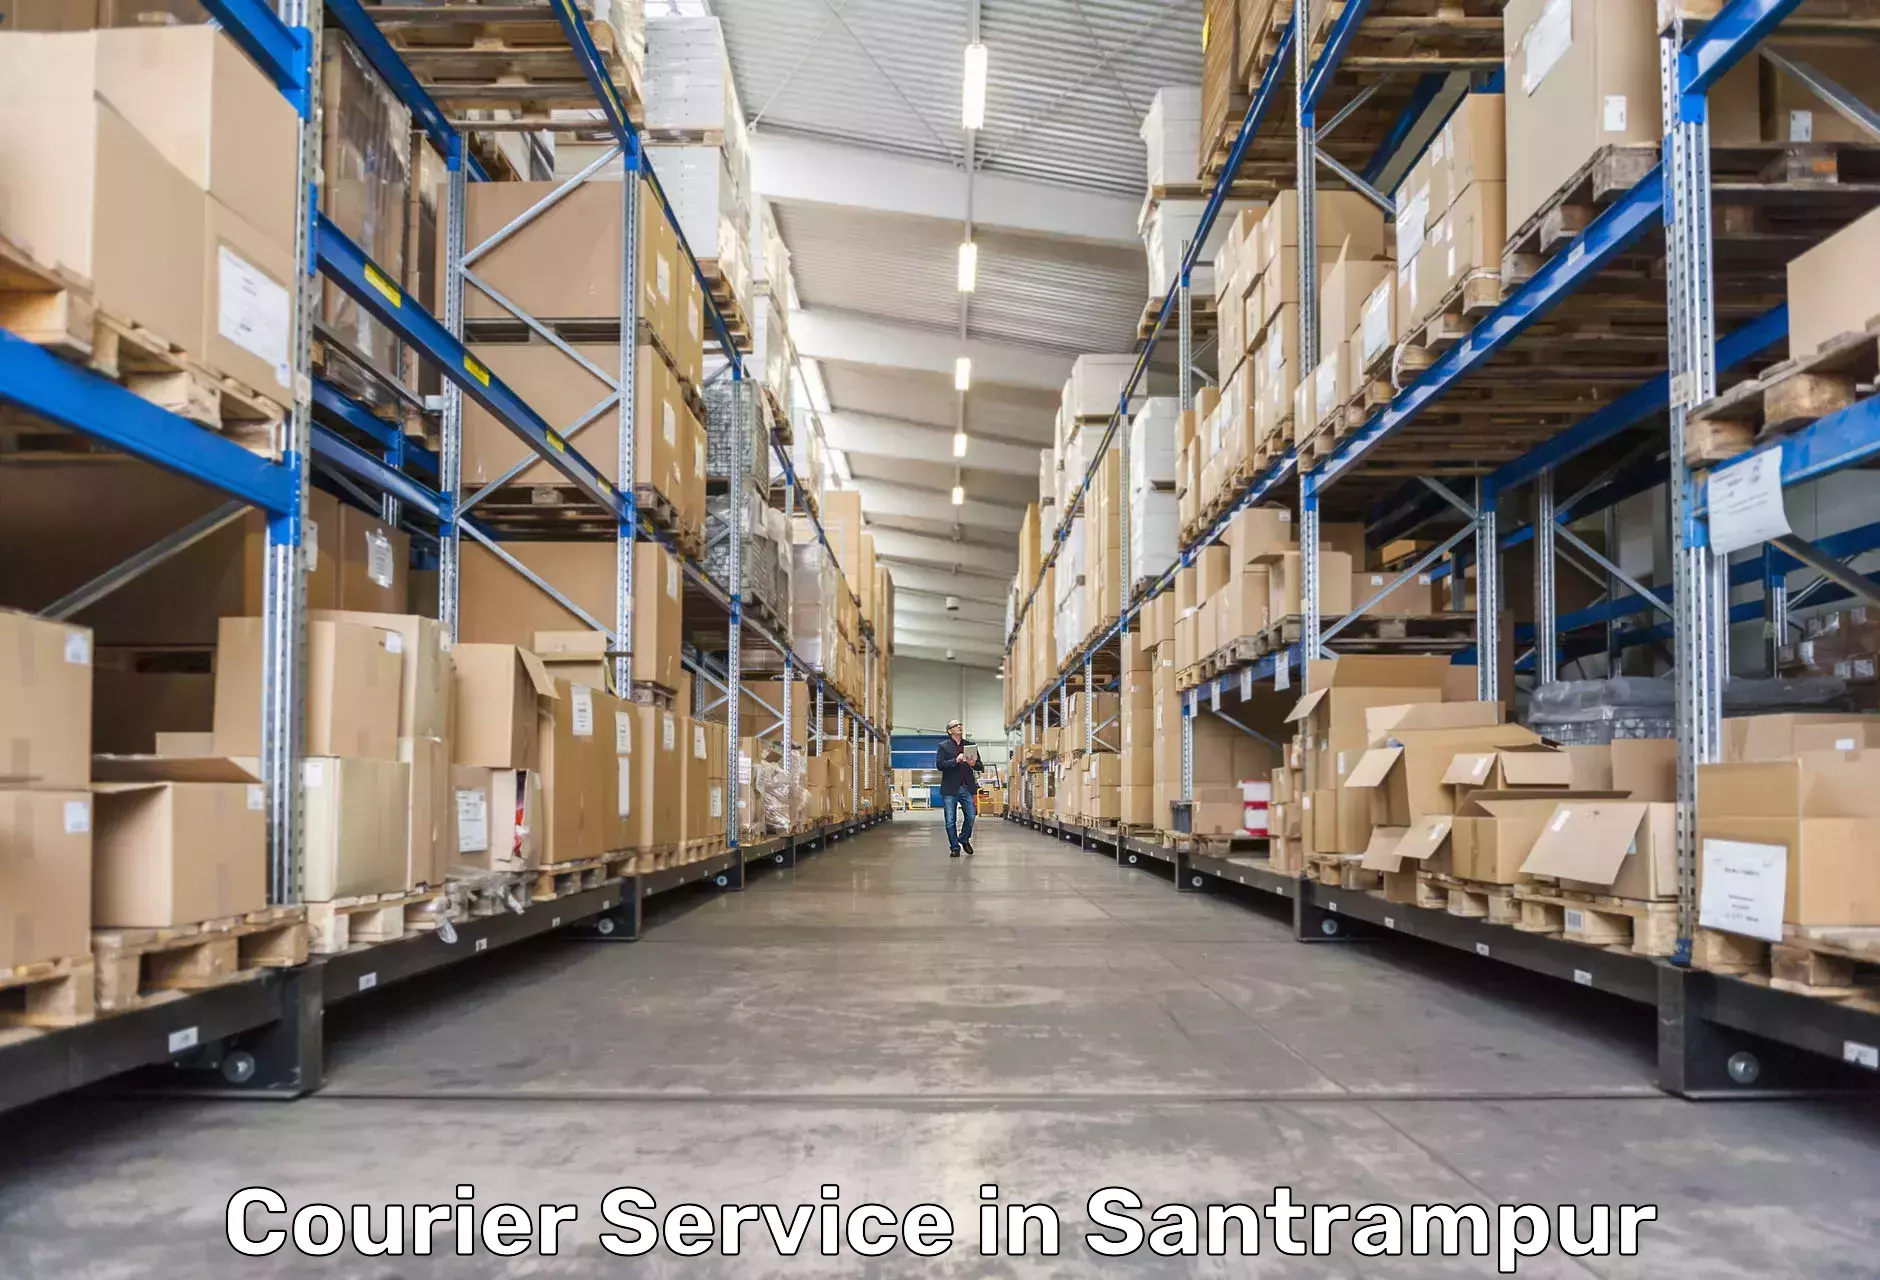 Air courier services in Santrampur